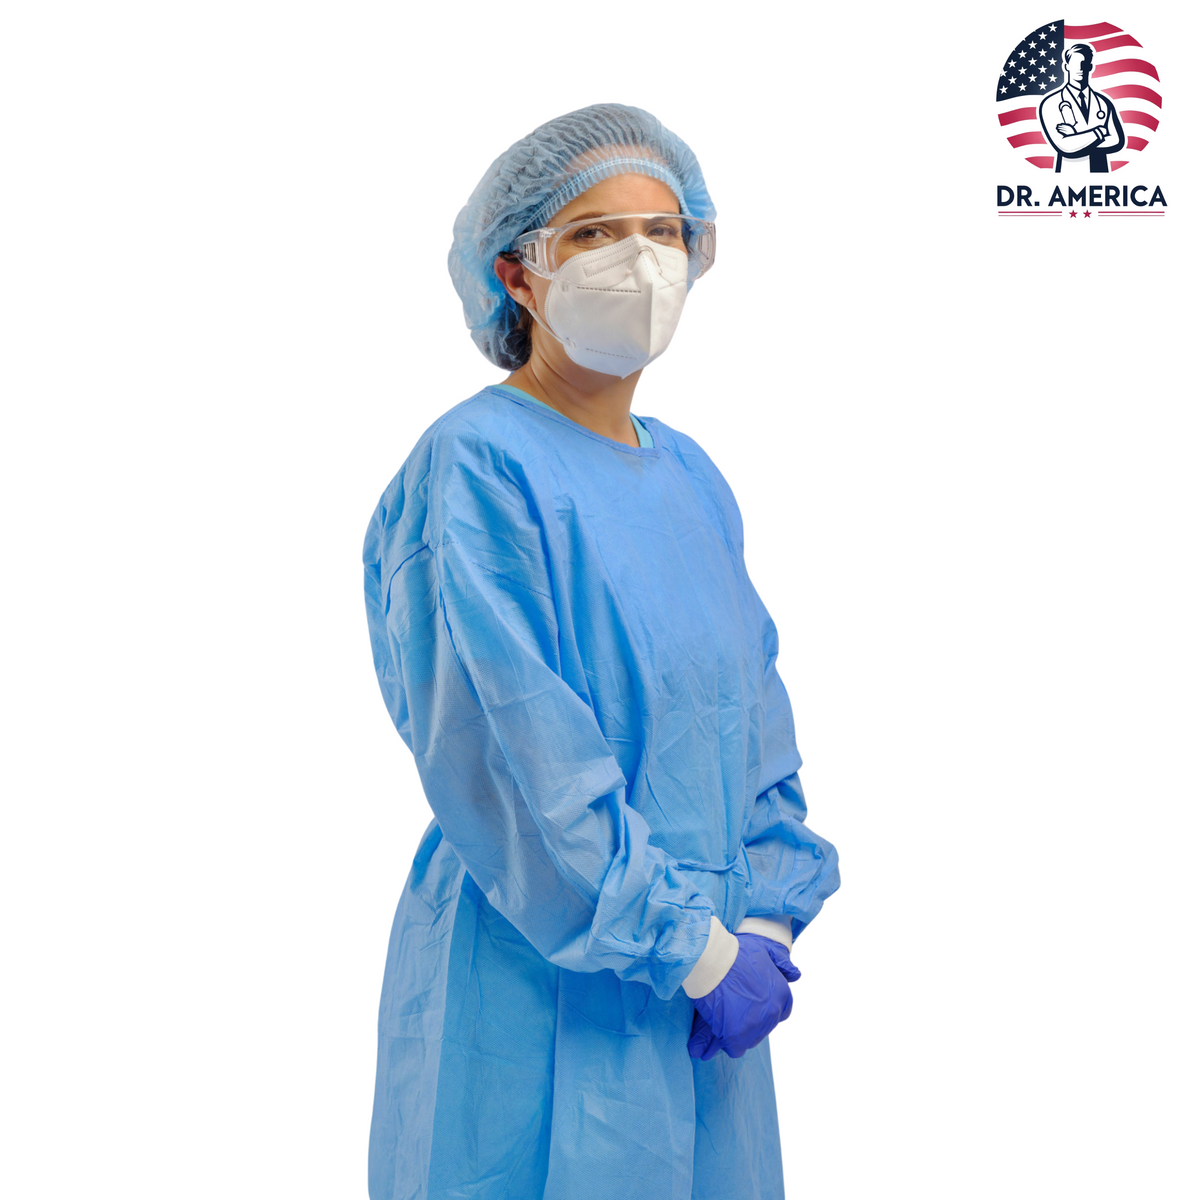 DirectProtect™ LEVEL 4 Sterile Surgical Gown with Drape, Full Body, Highly Breathable SSMMS Reinforced Fabric, with Closed Back and Knitted Cuffs, AAMI, FDA 510k & CE Tested, ONE SIZE FITS ALL (2XL Unisex) Dr. America Healthcare